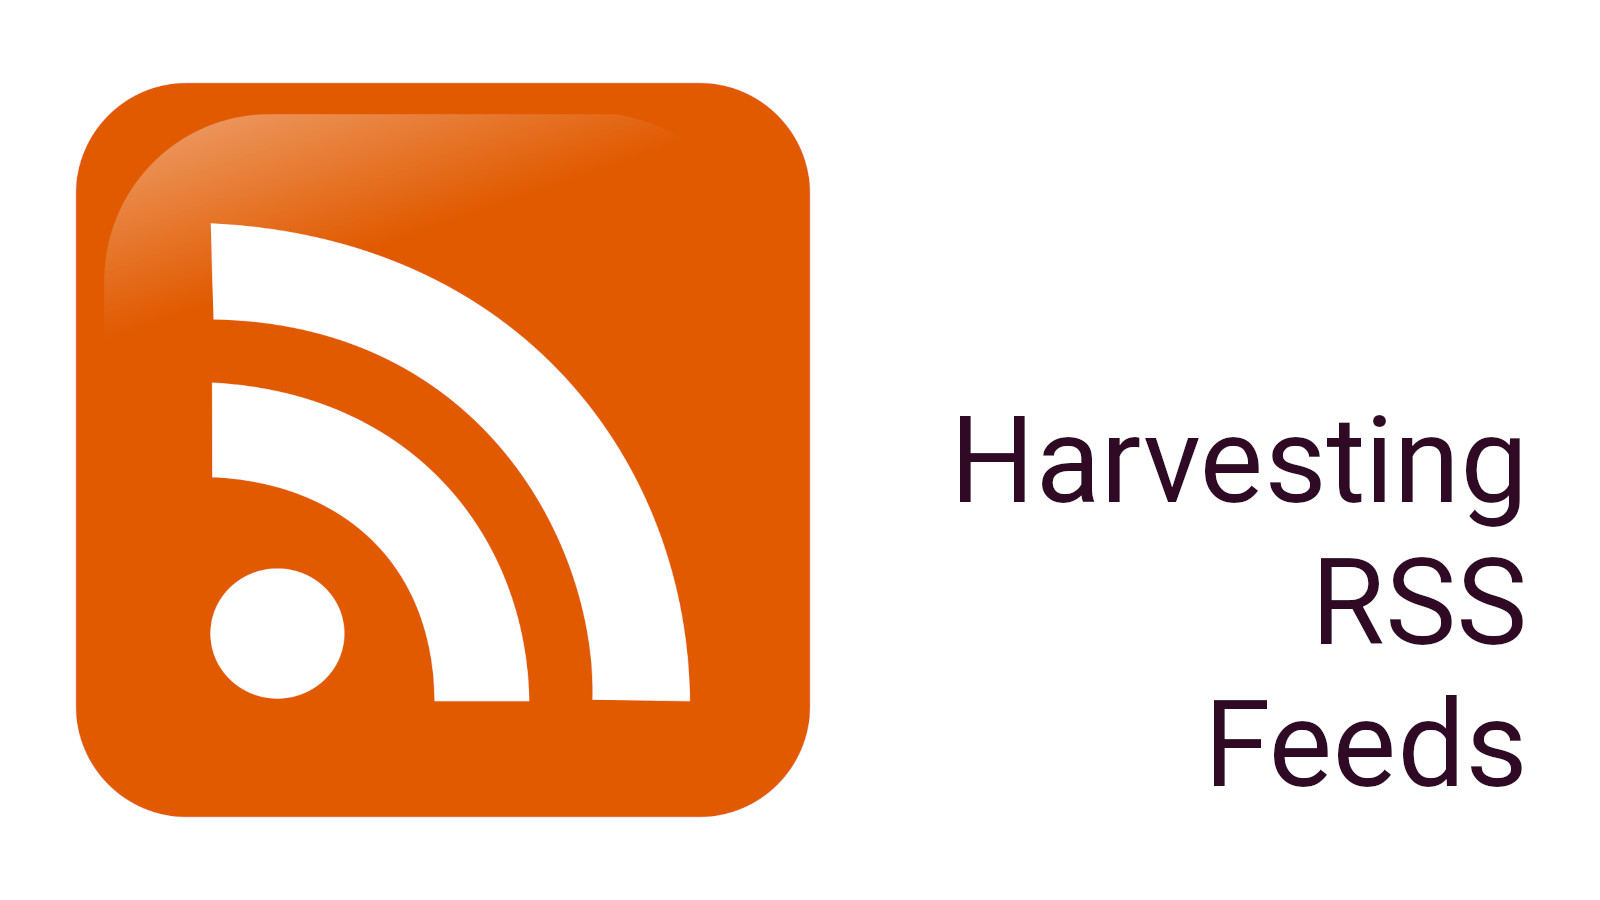 How to Harvest RSS Feeds